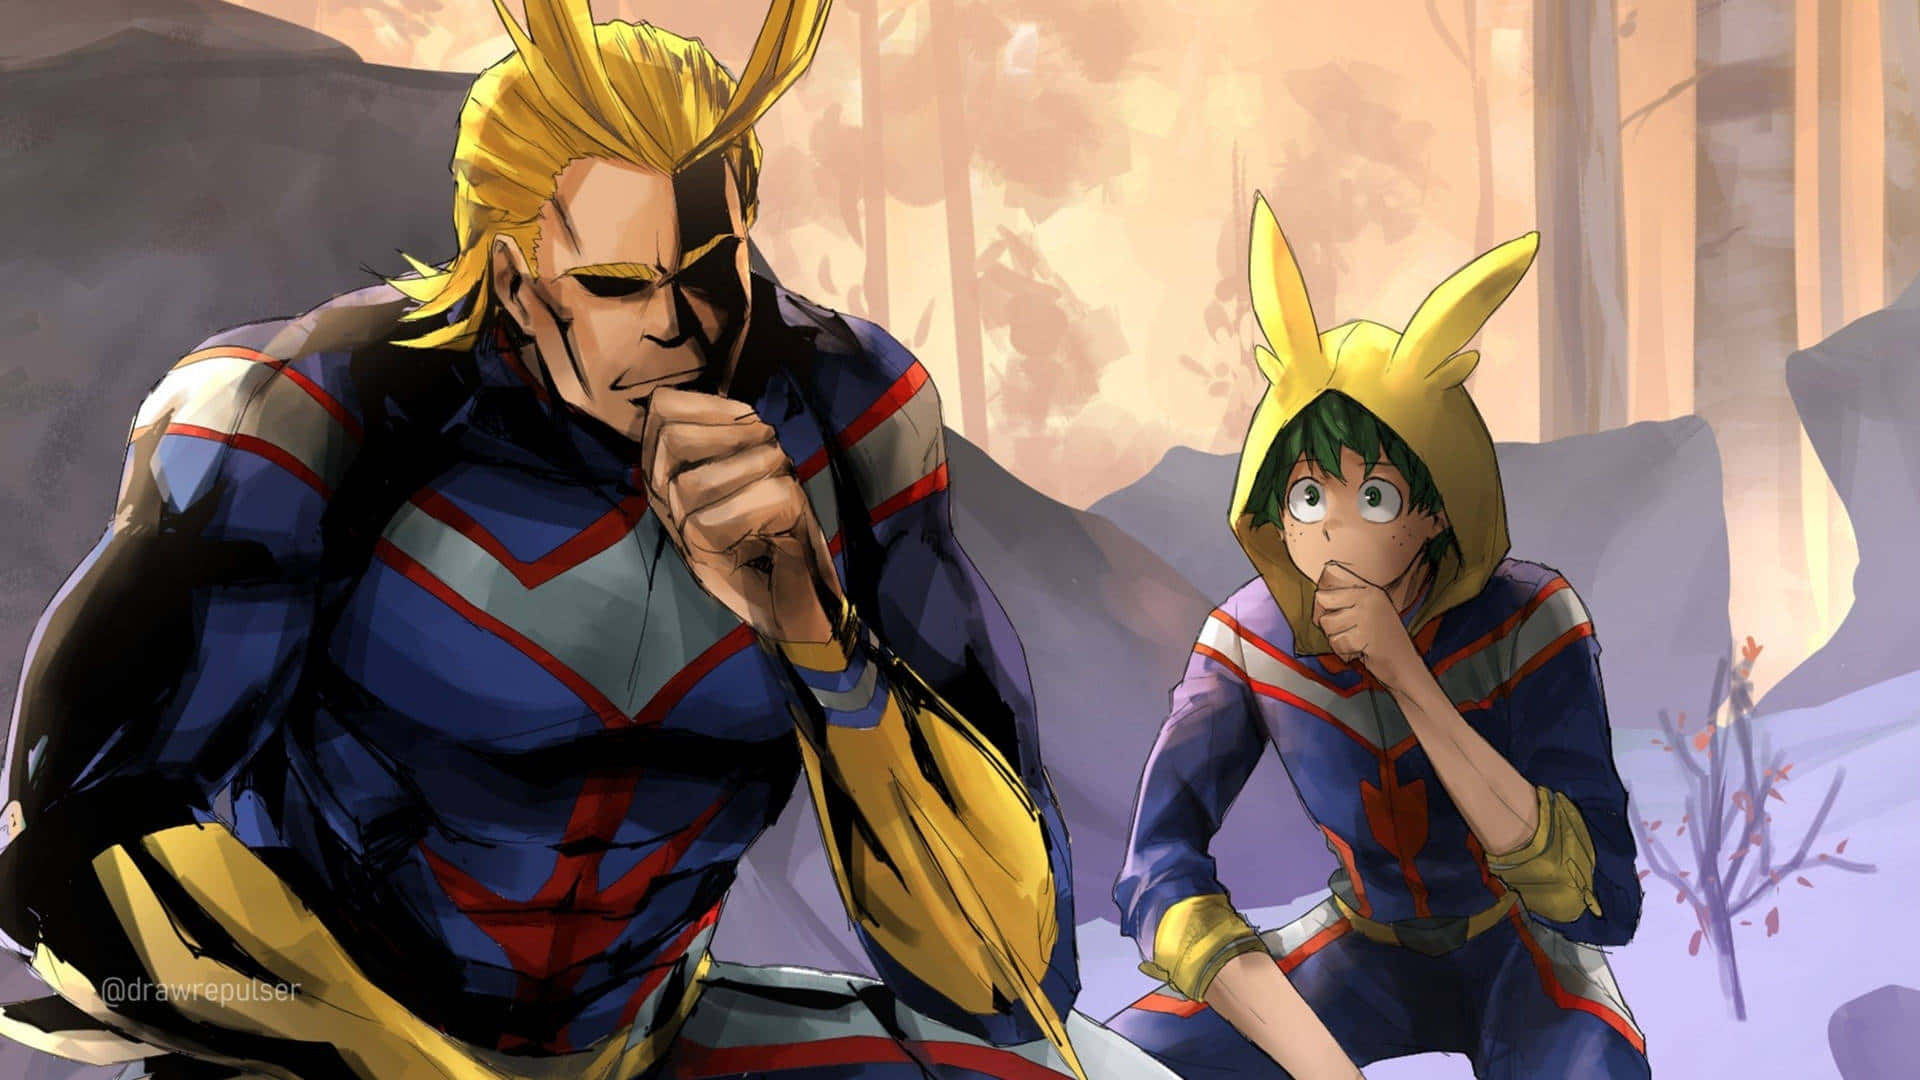 All Might saving the day!